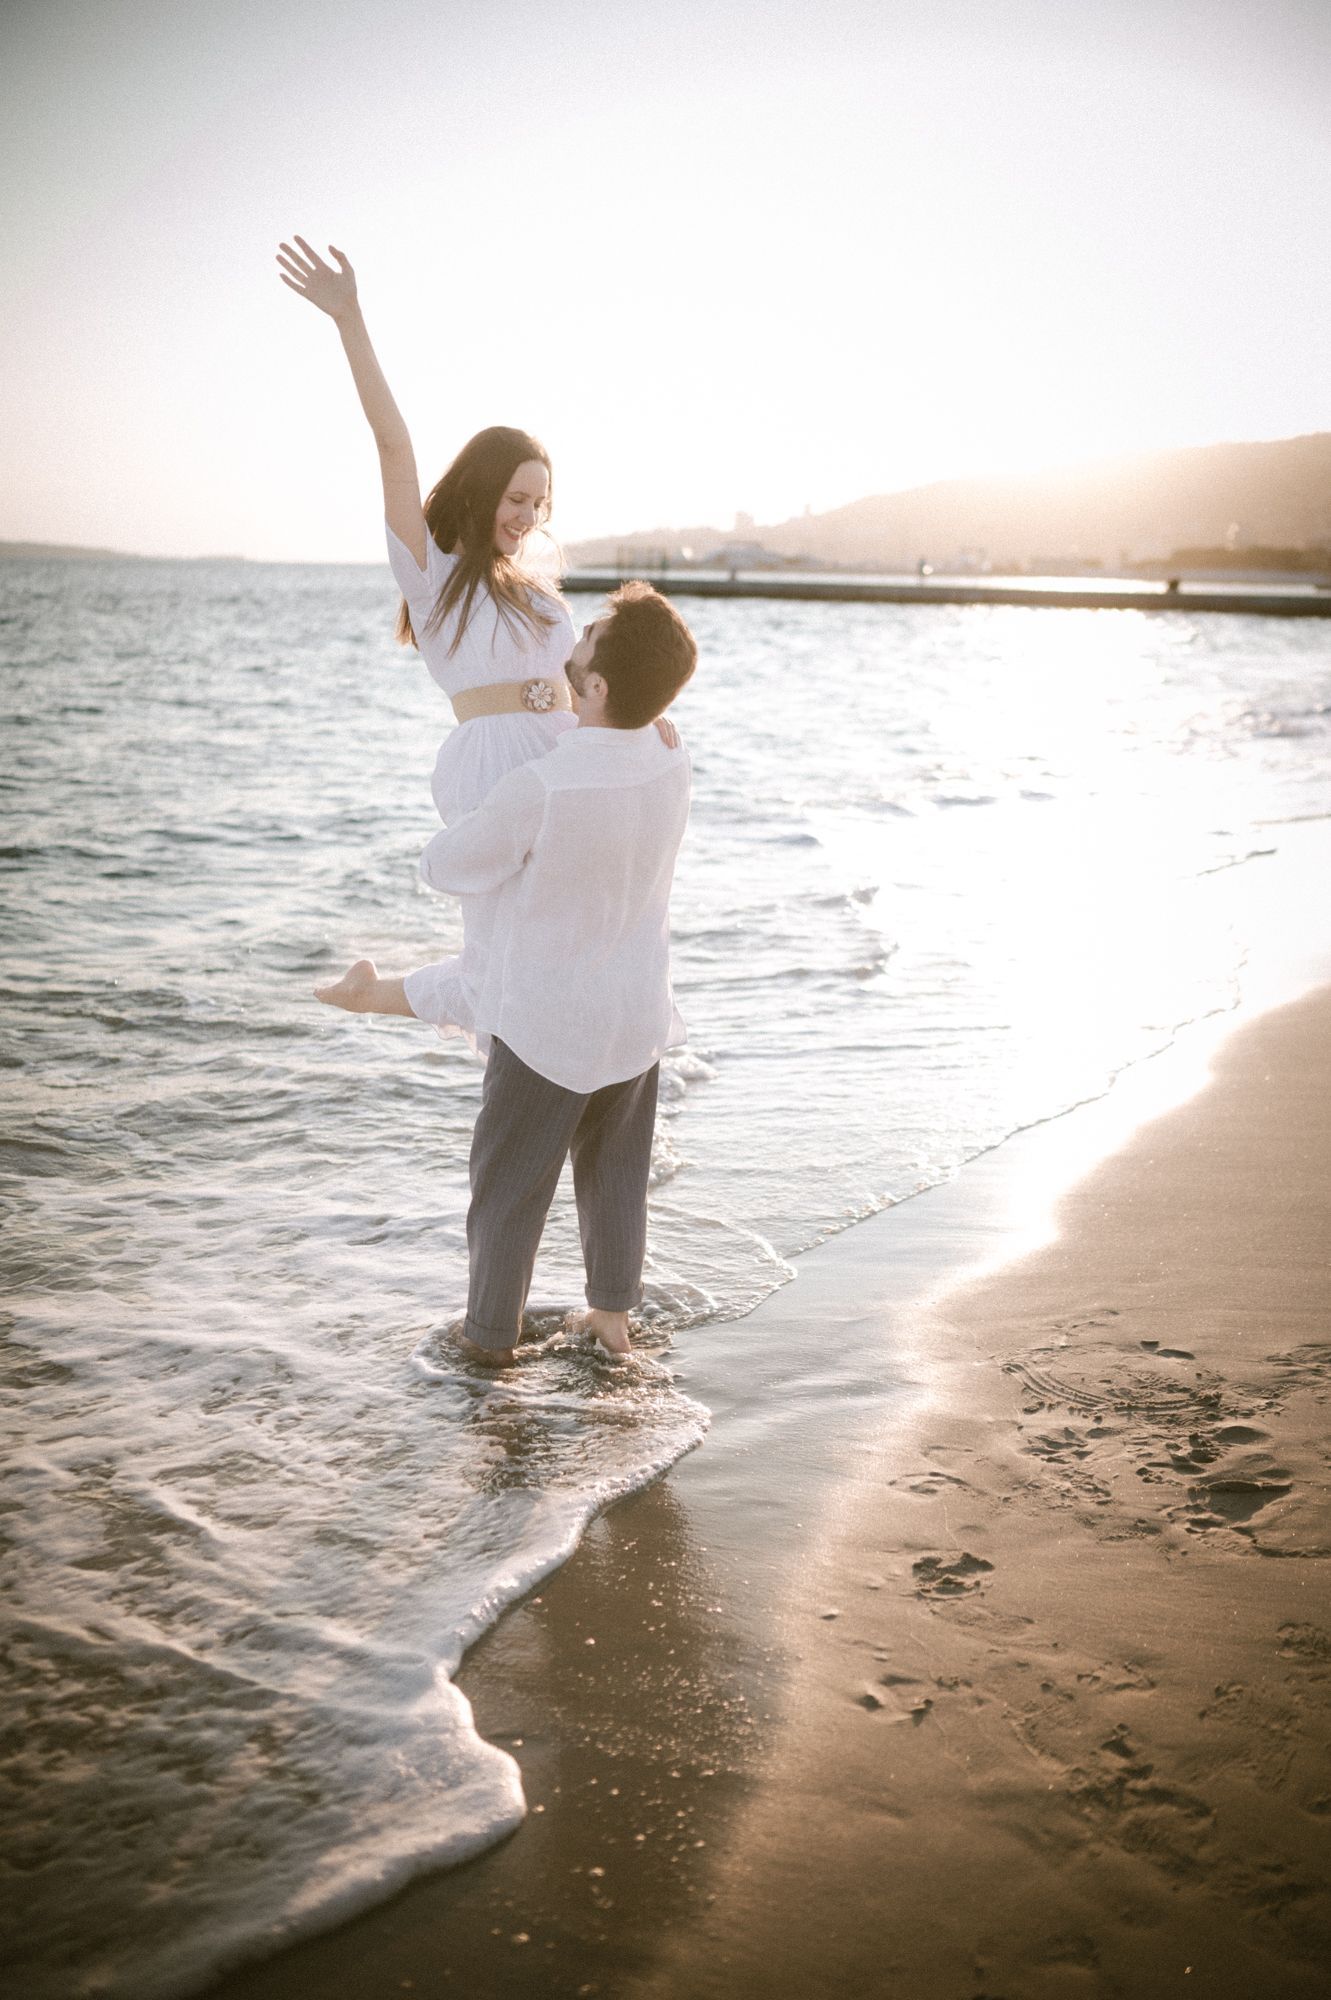 A golden hour couple photoshoot on the beach on the French Riviera